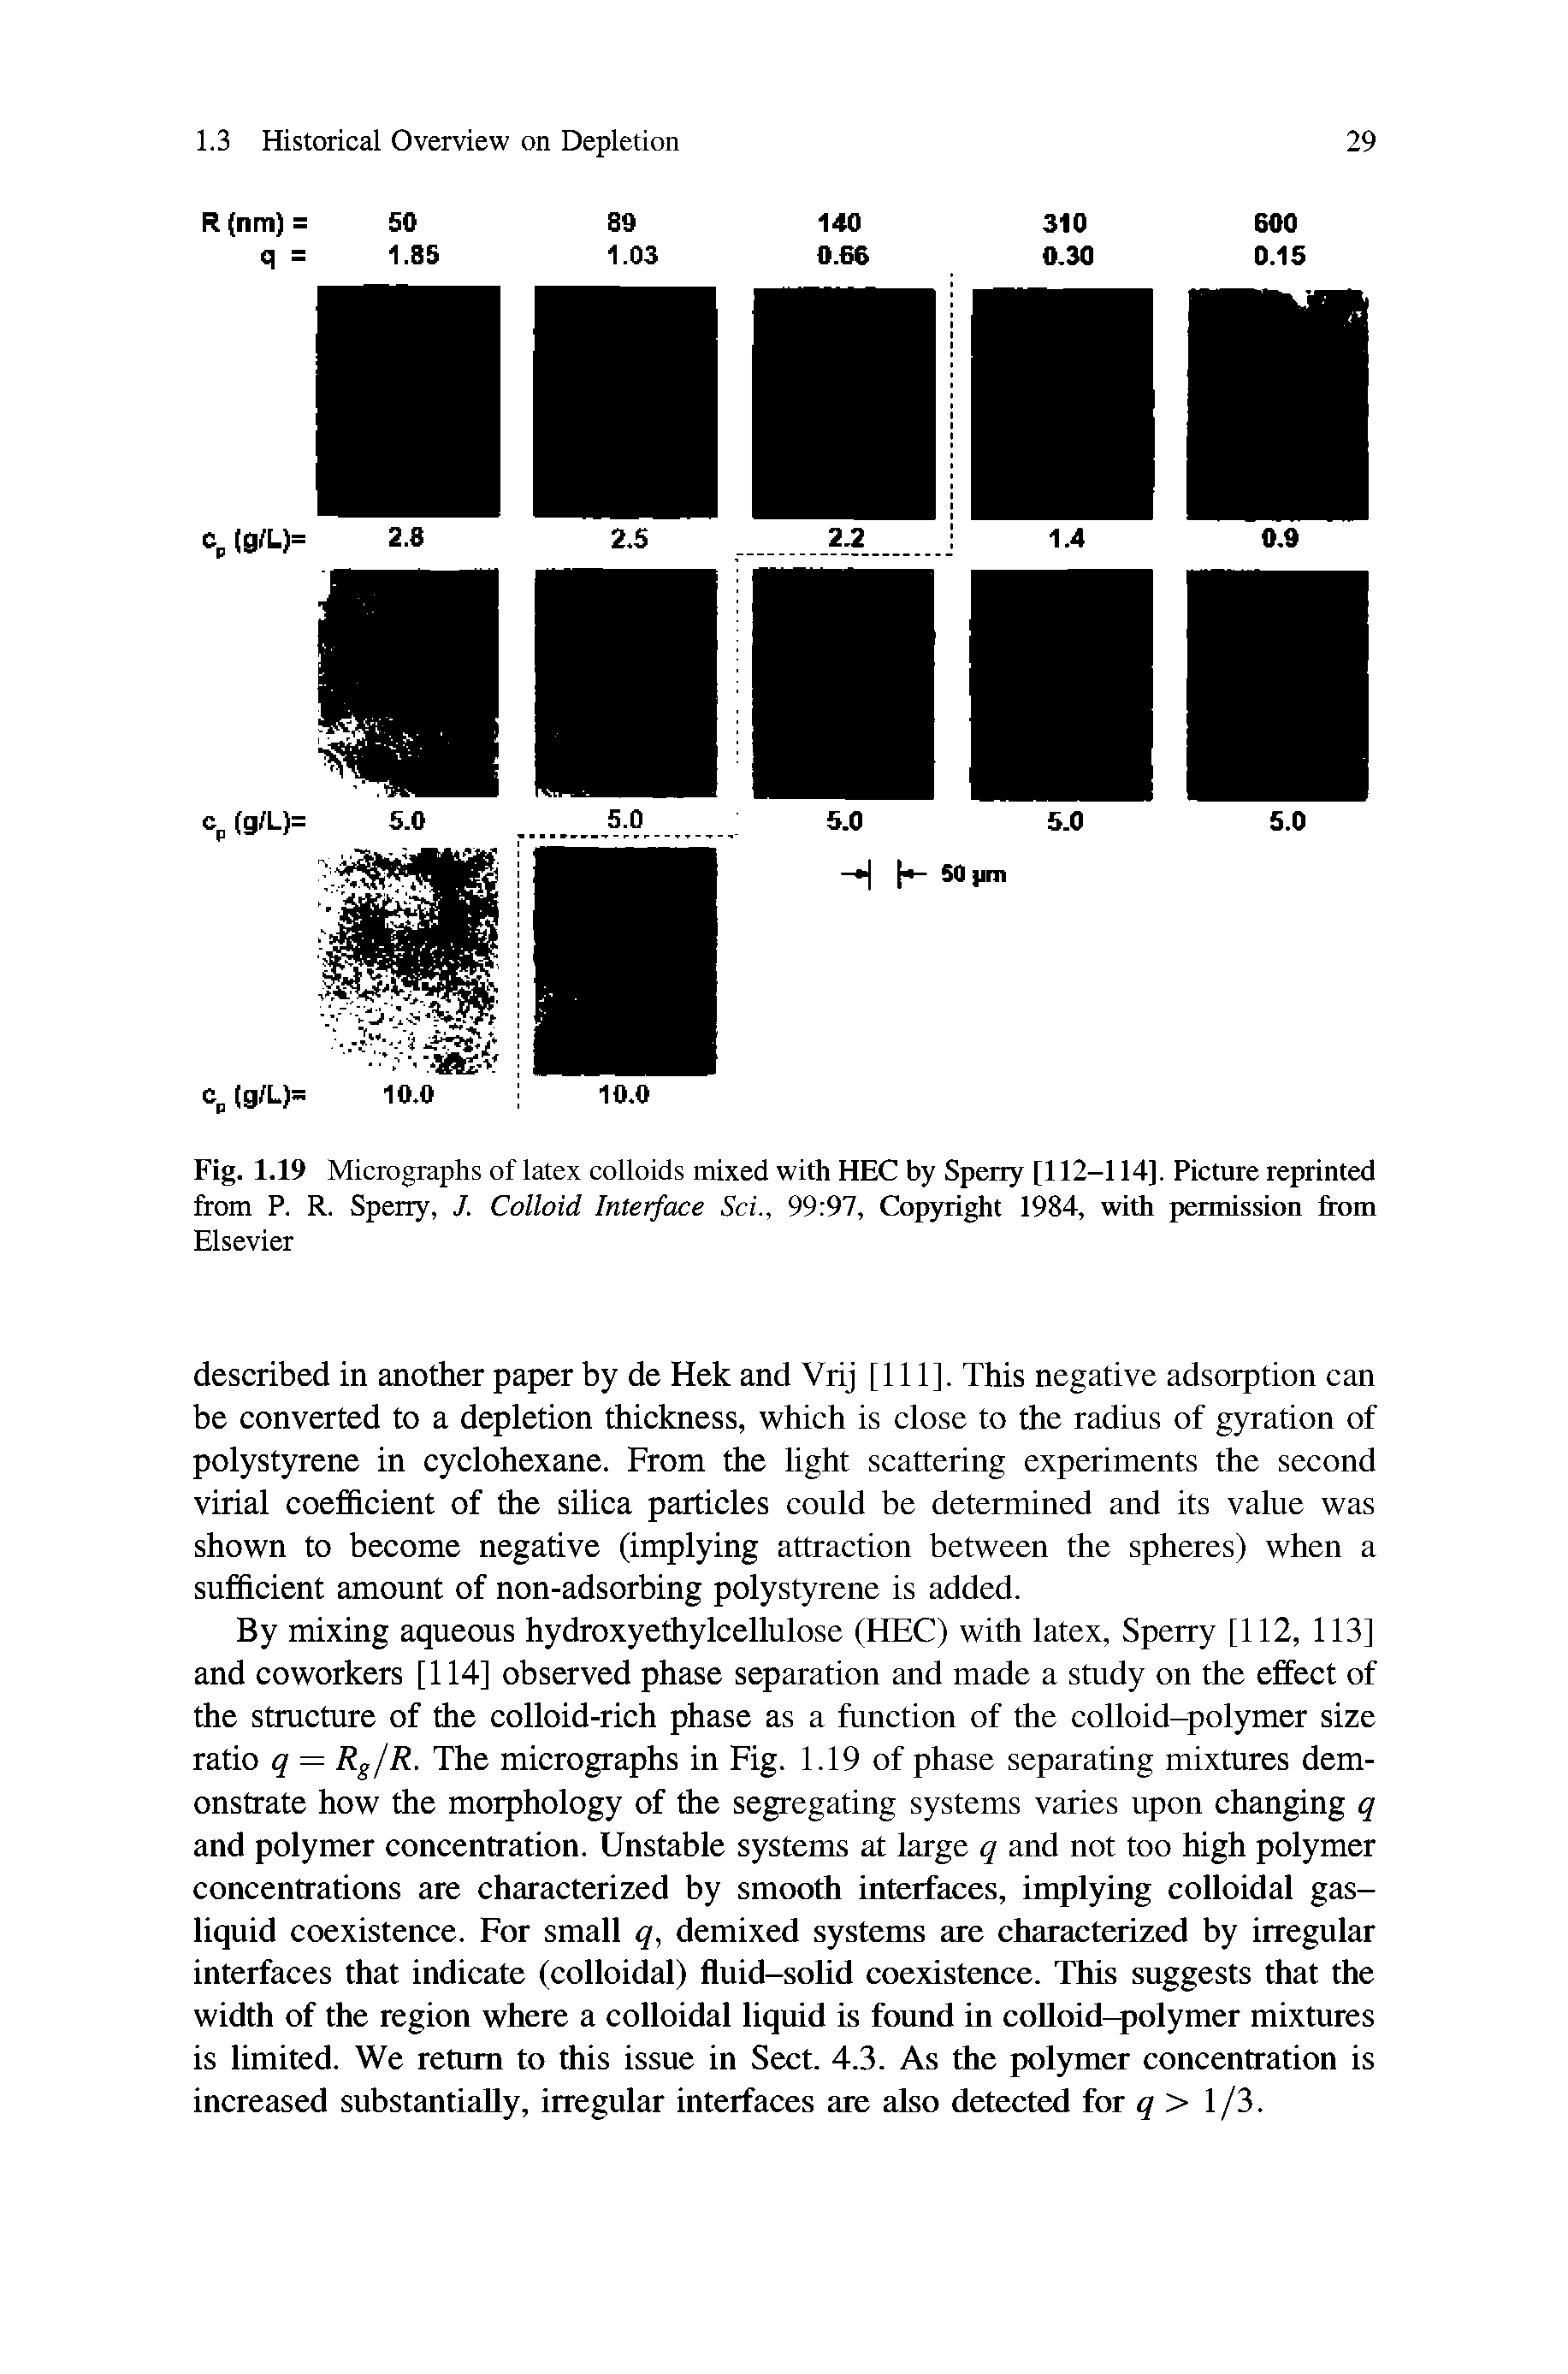 Fig. 1.19 Micrographs of latex colloids mixed with HEC by Speiiy [112-114]. Picture reprinted from P. R. Sperry, J. Colloid Interface Sci., 99 97, Copyright 1984, with permission Ixom Elsevier...